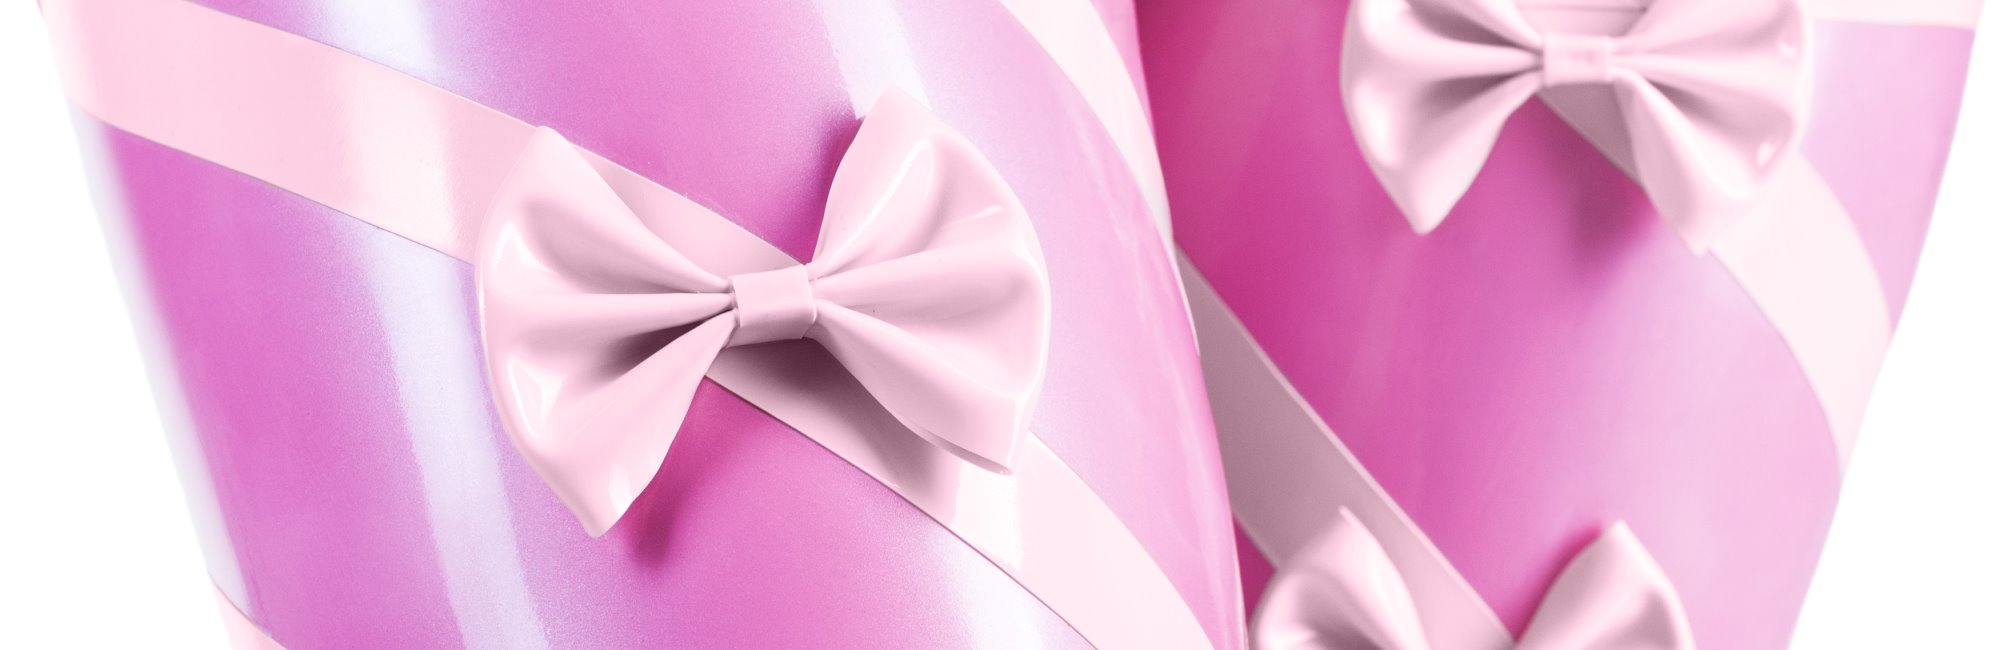 Close-up of pink latex stockings with stripes and bows.